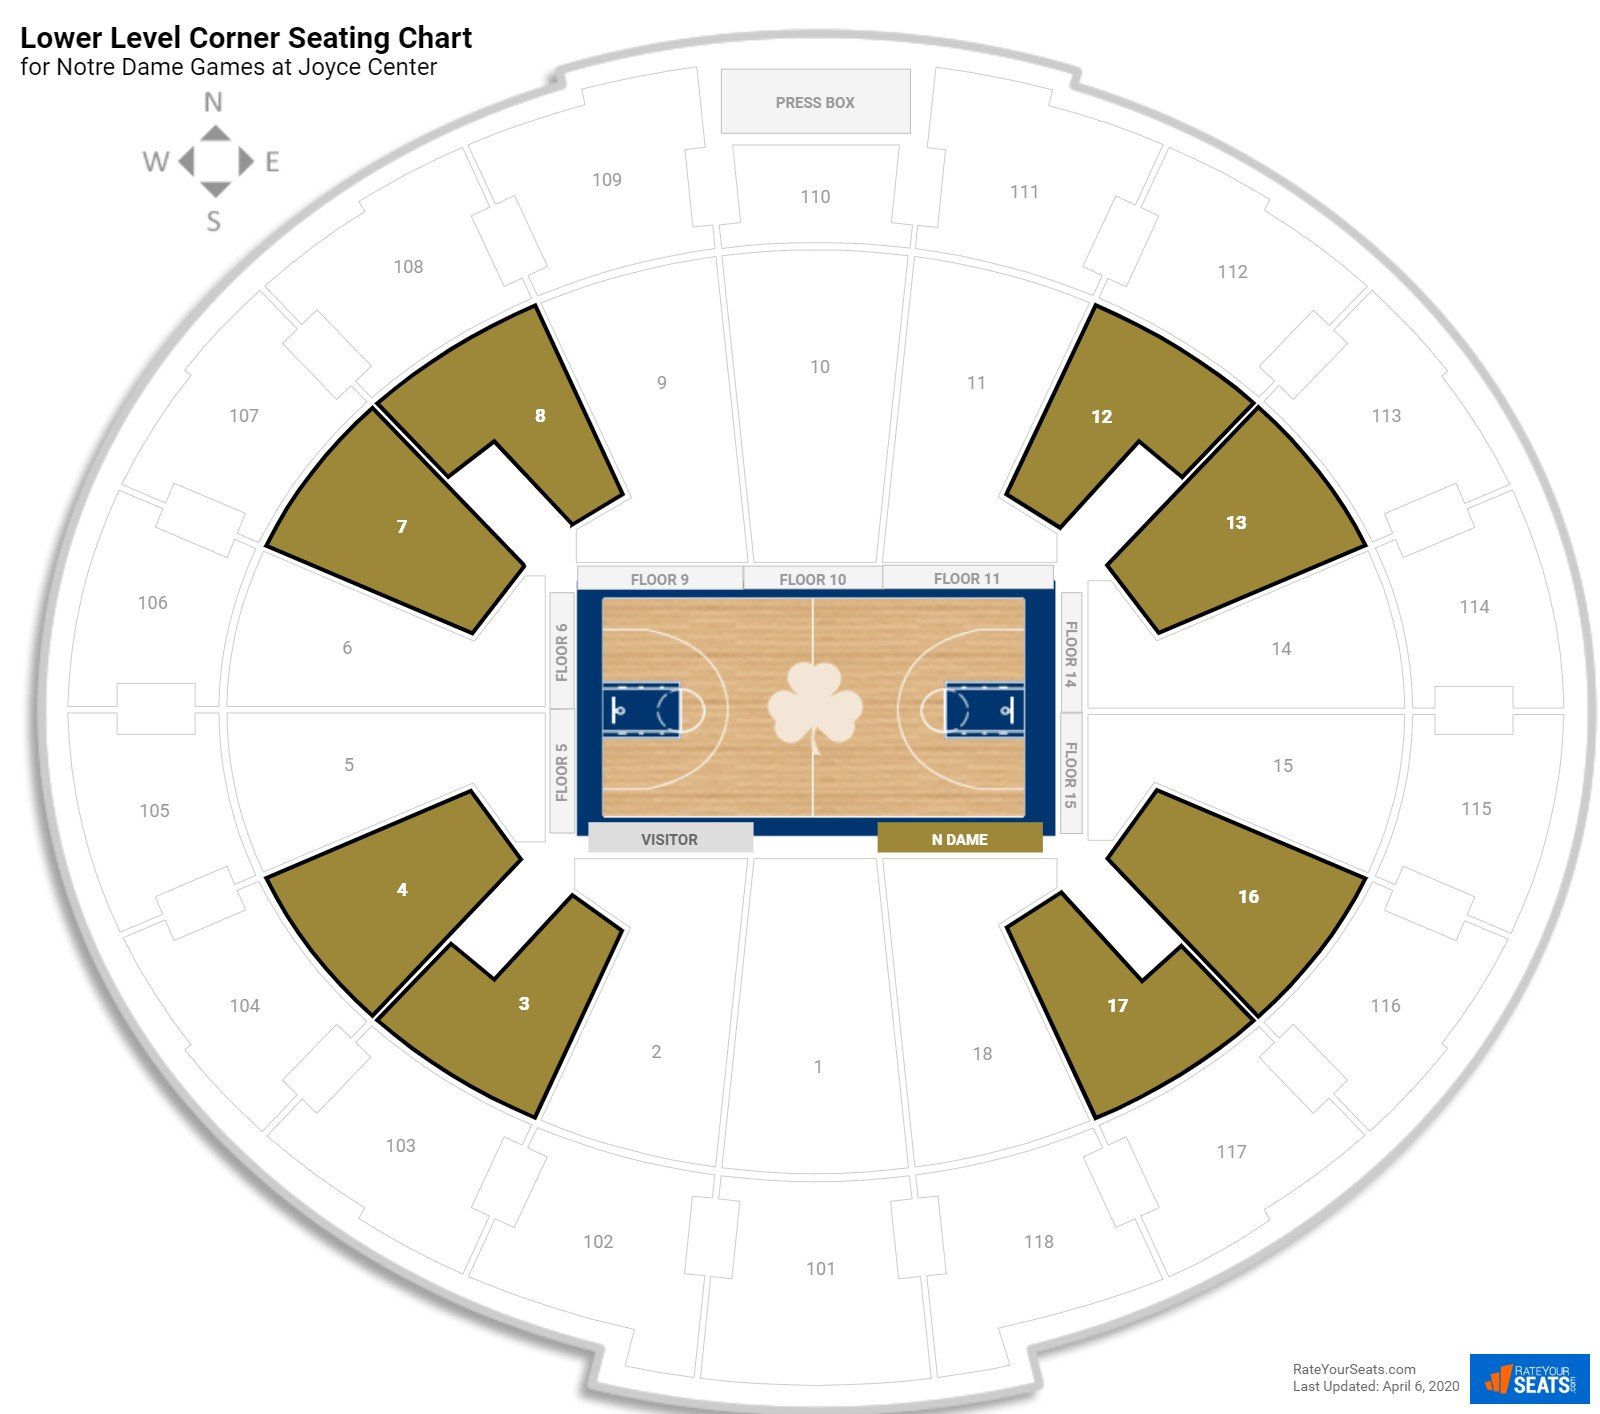 Joyce Center (Notre Dame) Seating Guide - RateYourSeats.com